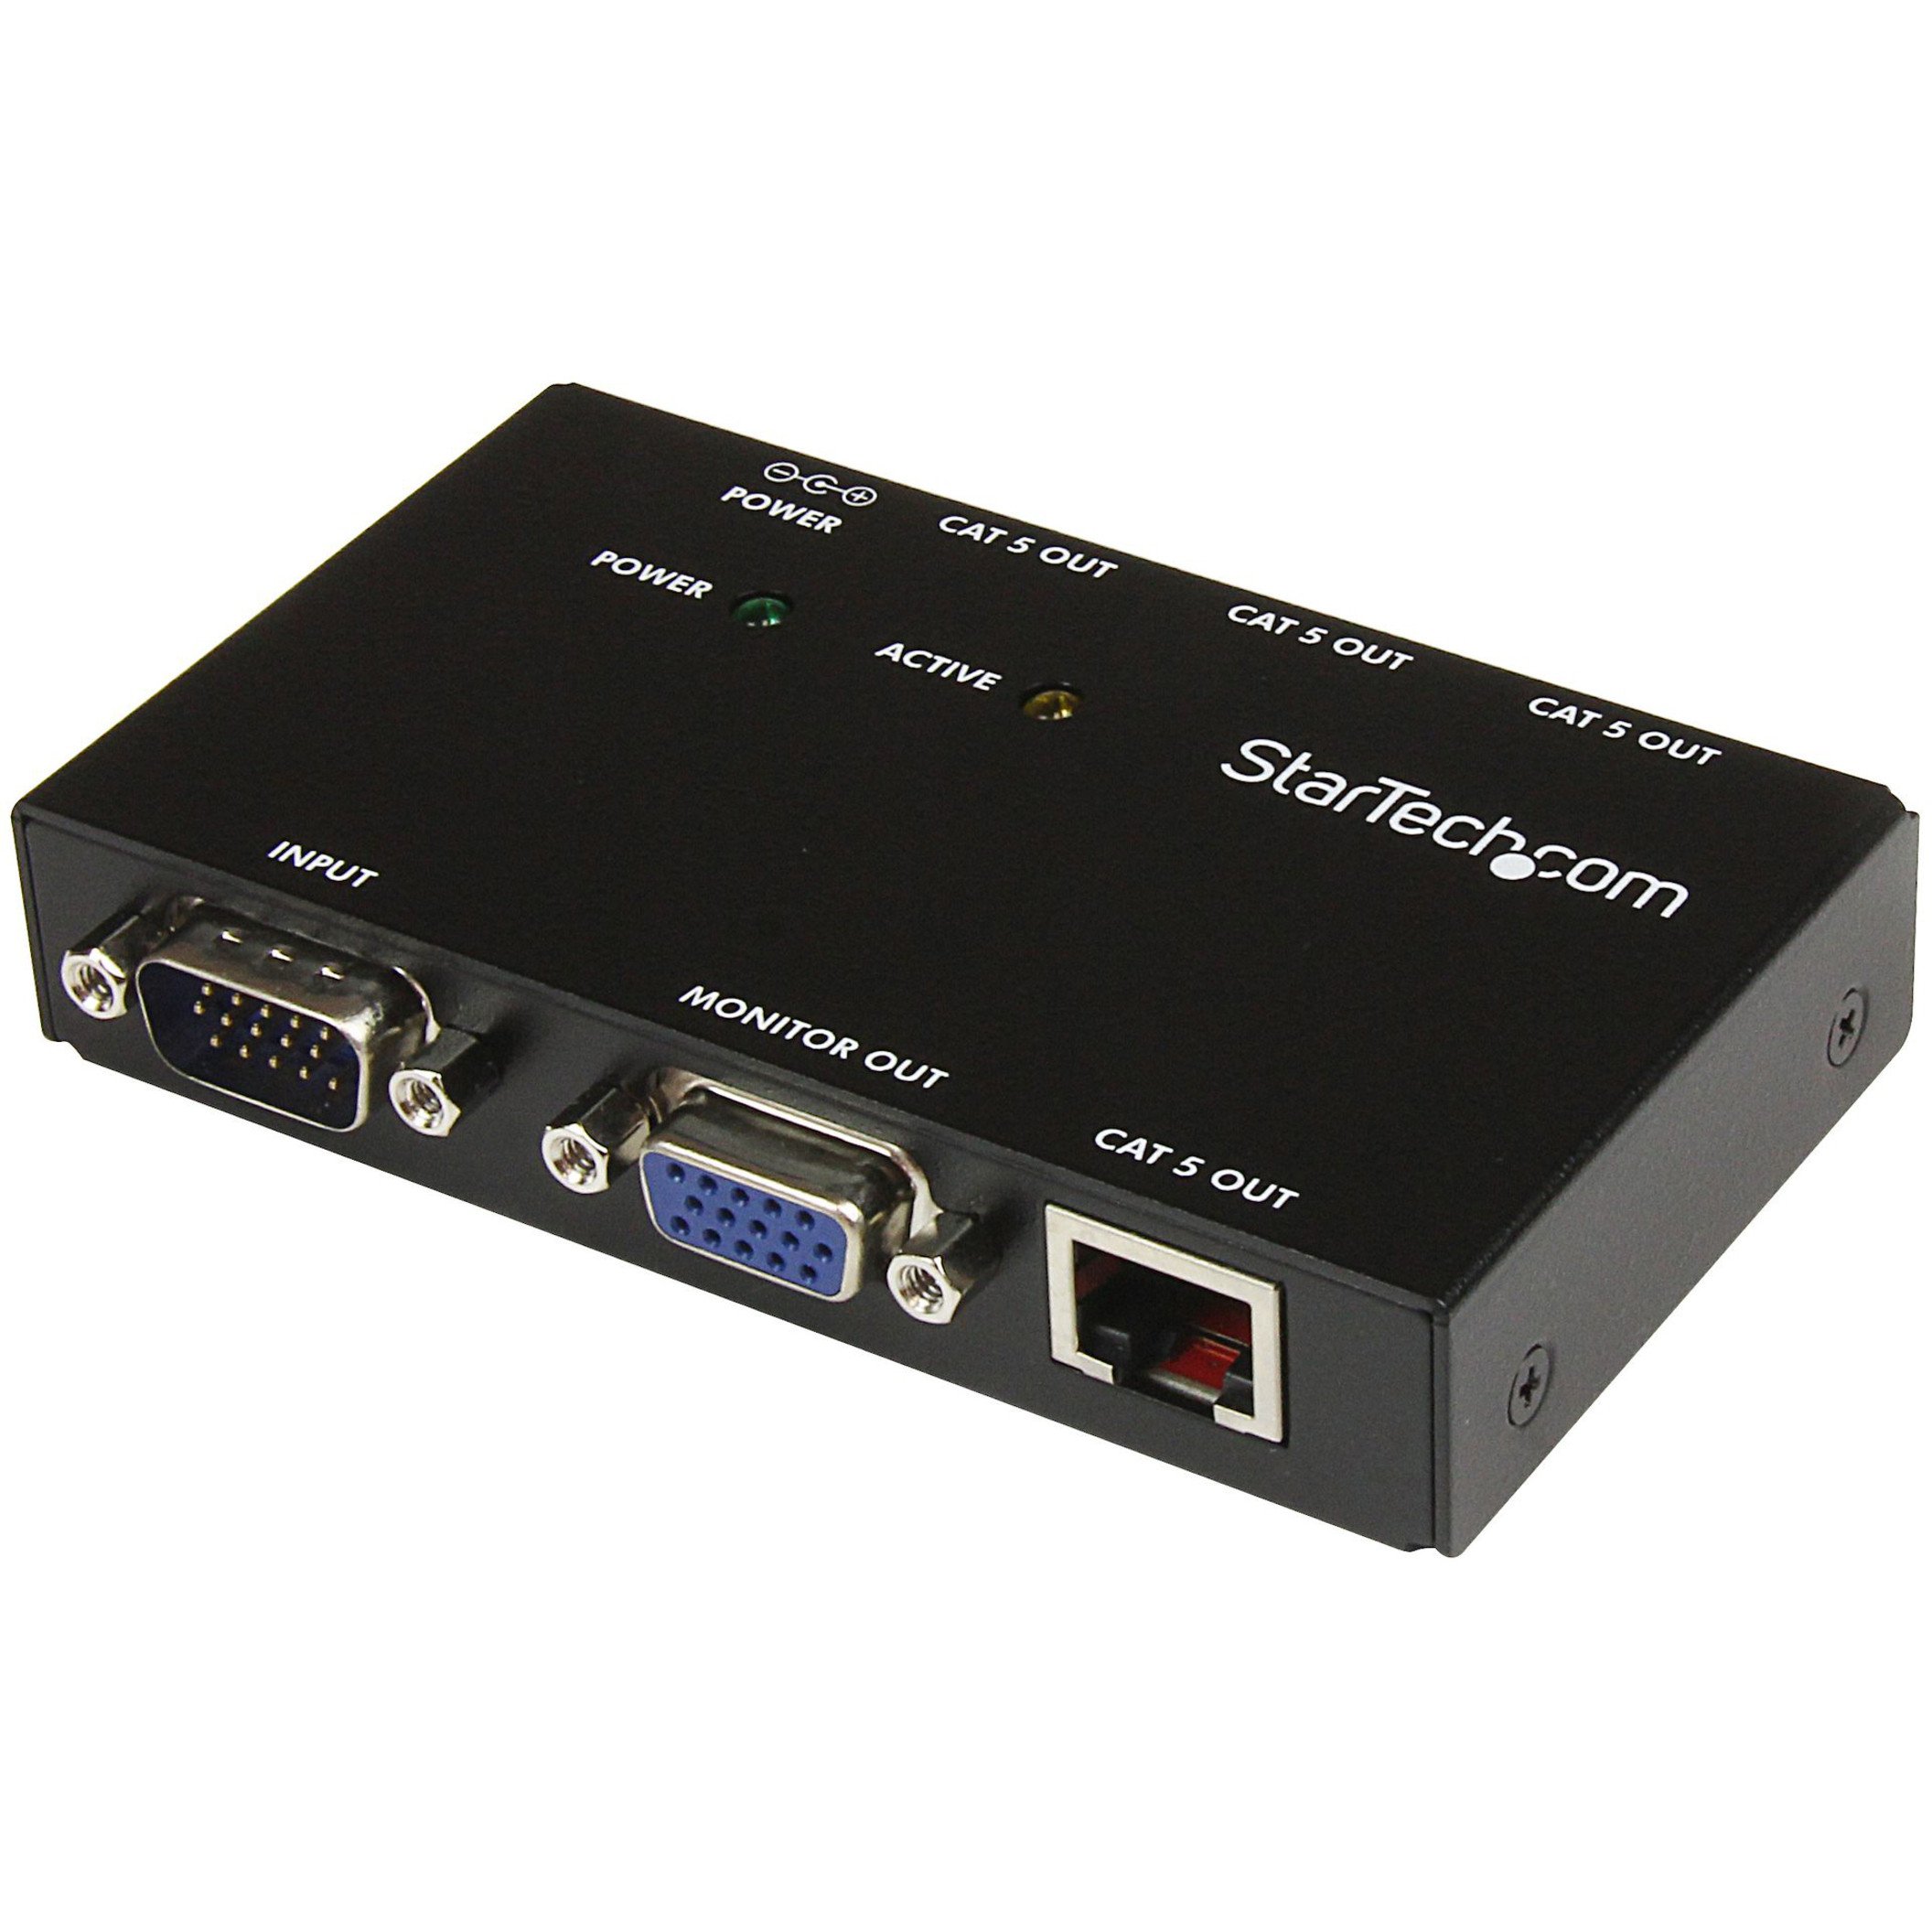 Startech .com 4 Port VGA Over CAT5 Video Extender450ft (150m)Extend and distribute a VGA signal to up to 4 displays over Cat5 cablevga o… ST1214T